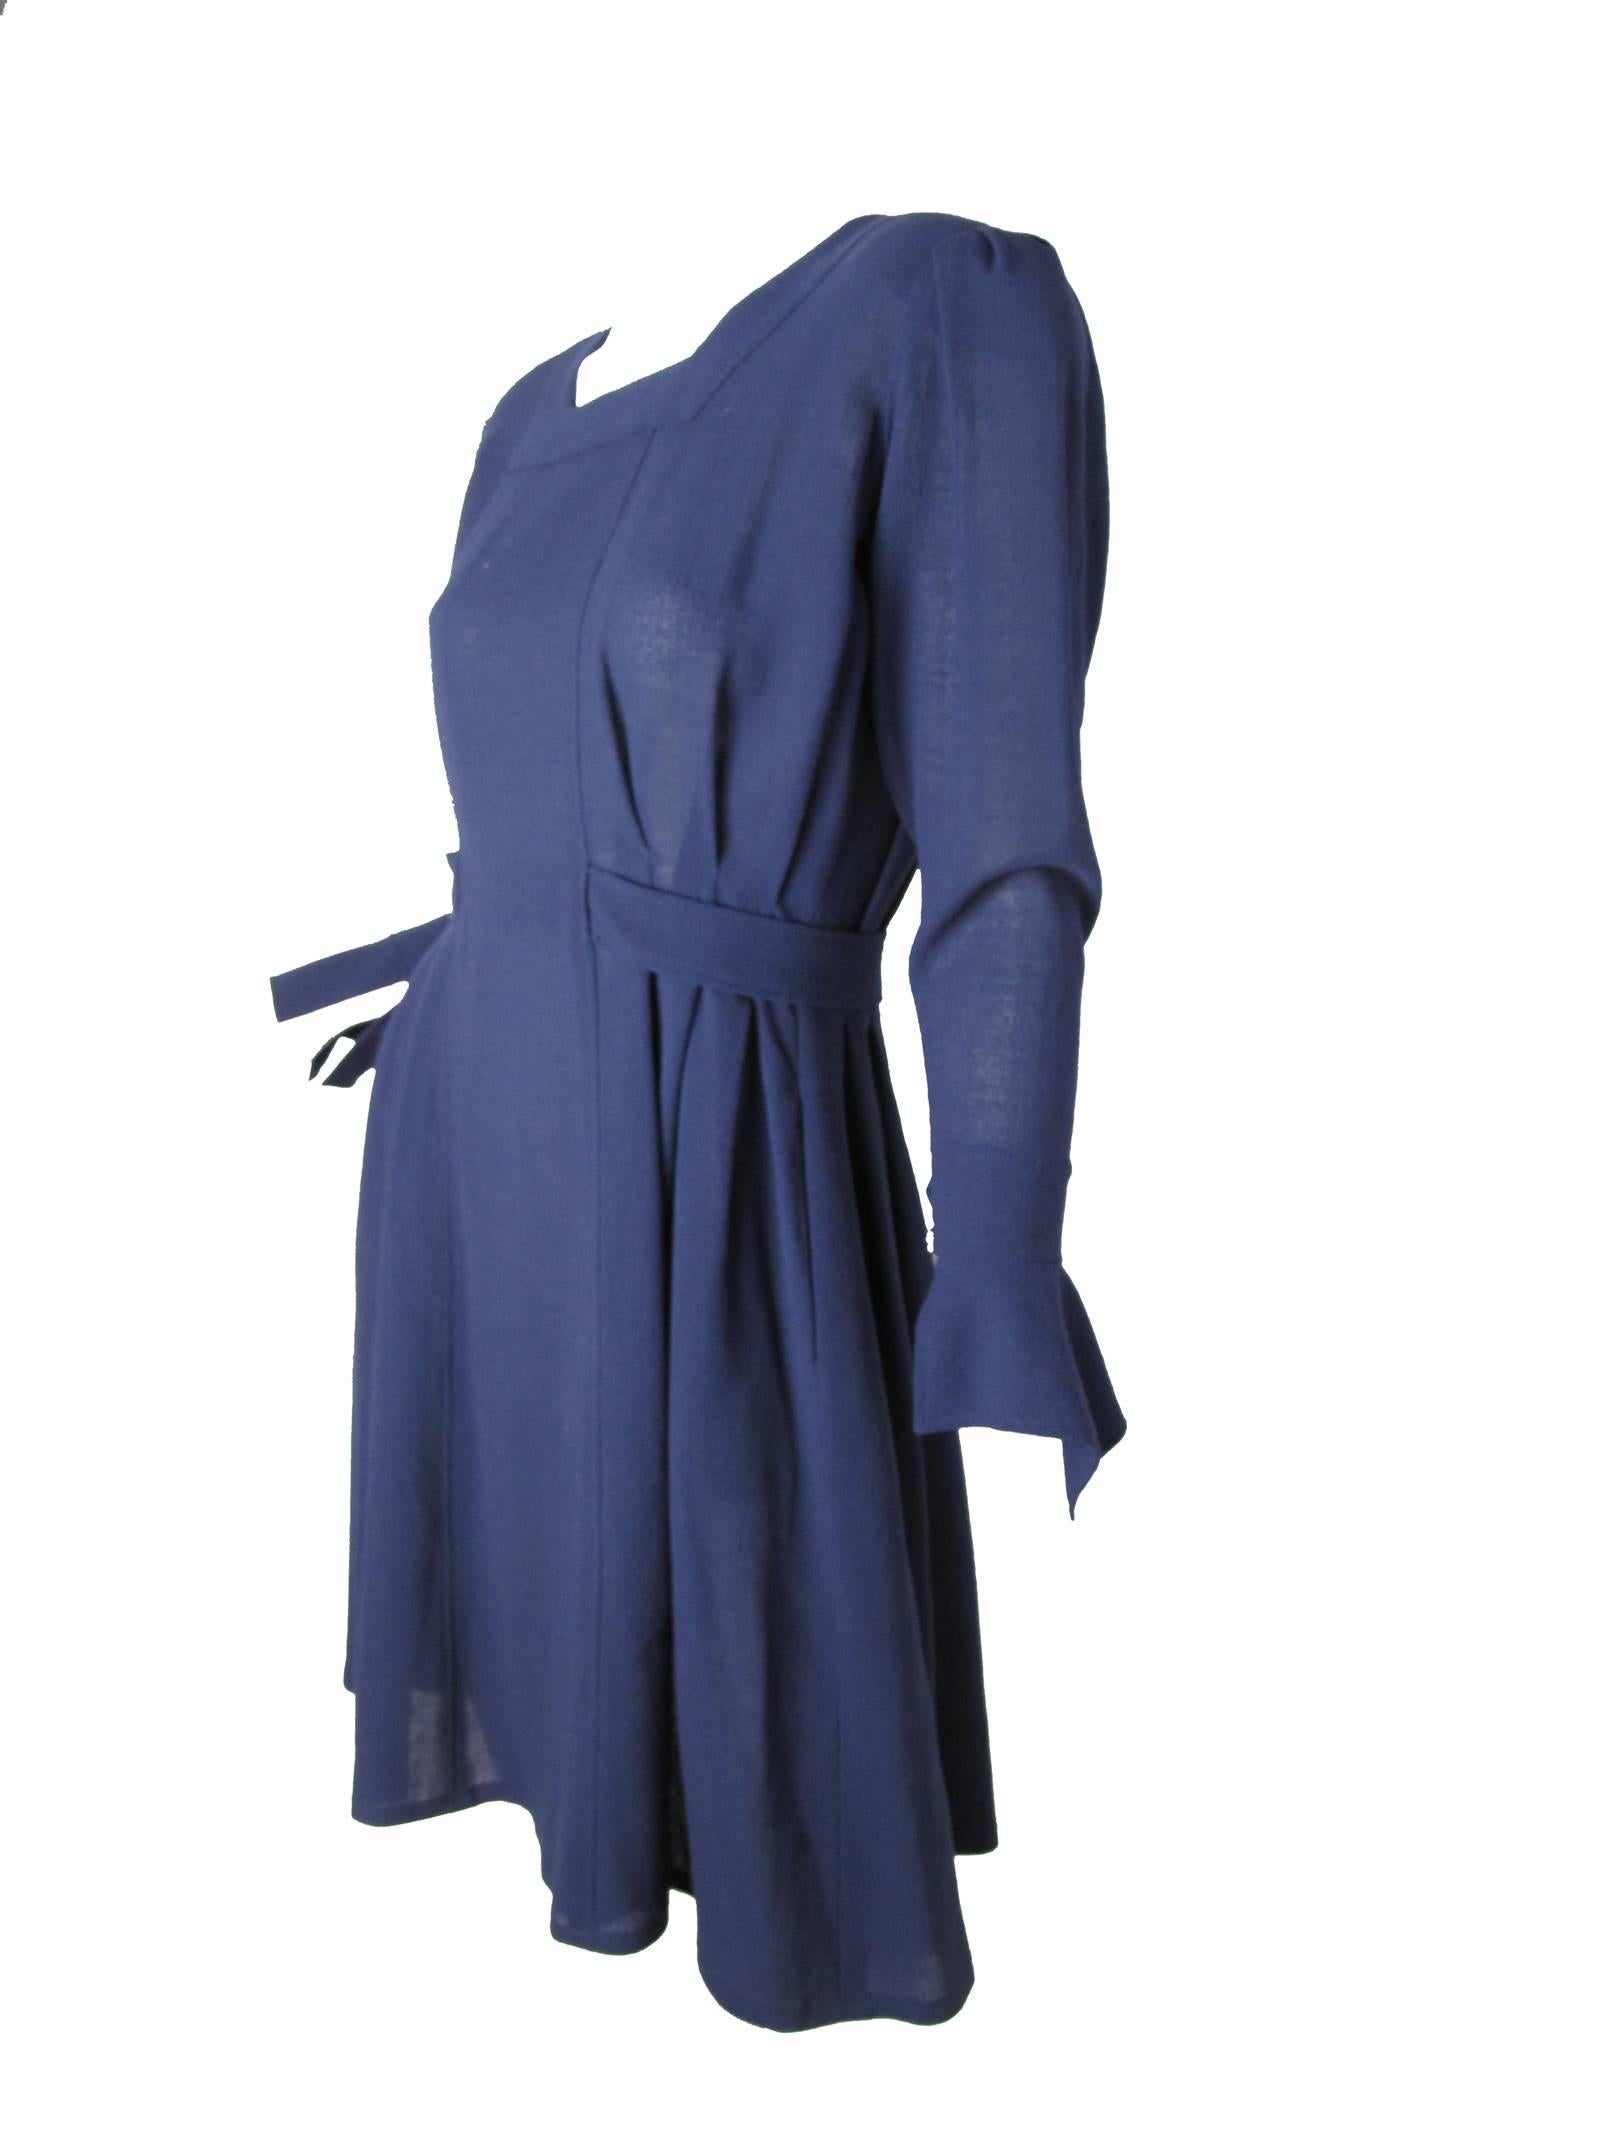 1980s Jean Muir navy blue crepe dress with attached belt. Pleating on sides. Pockets. Condition: Excellent.  Size US 6 UK 8
40